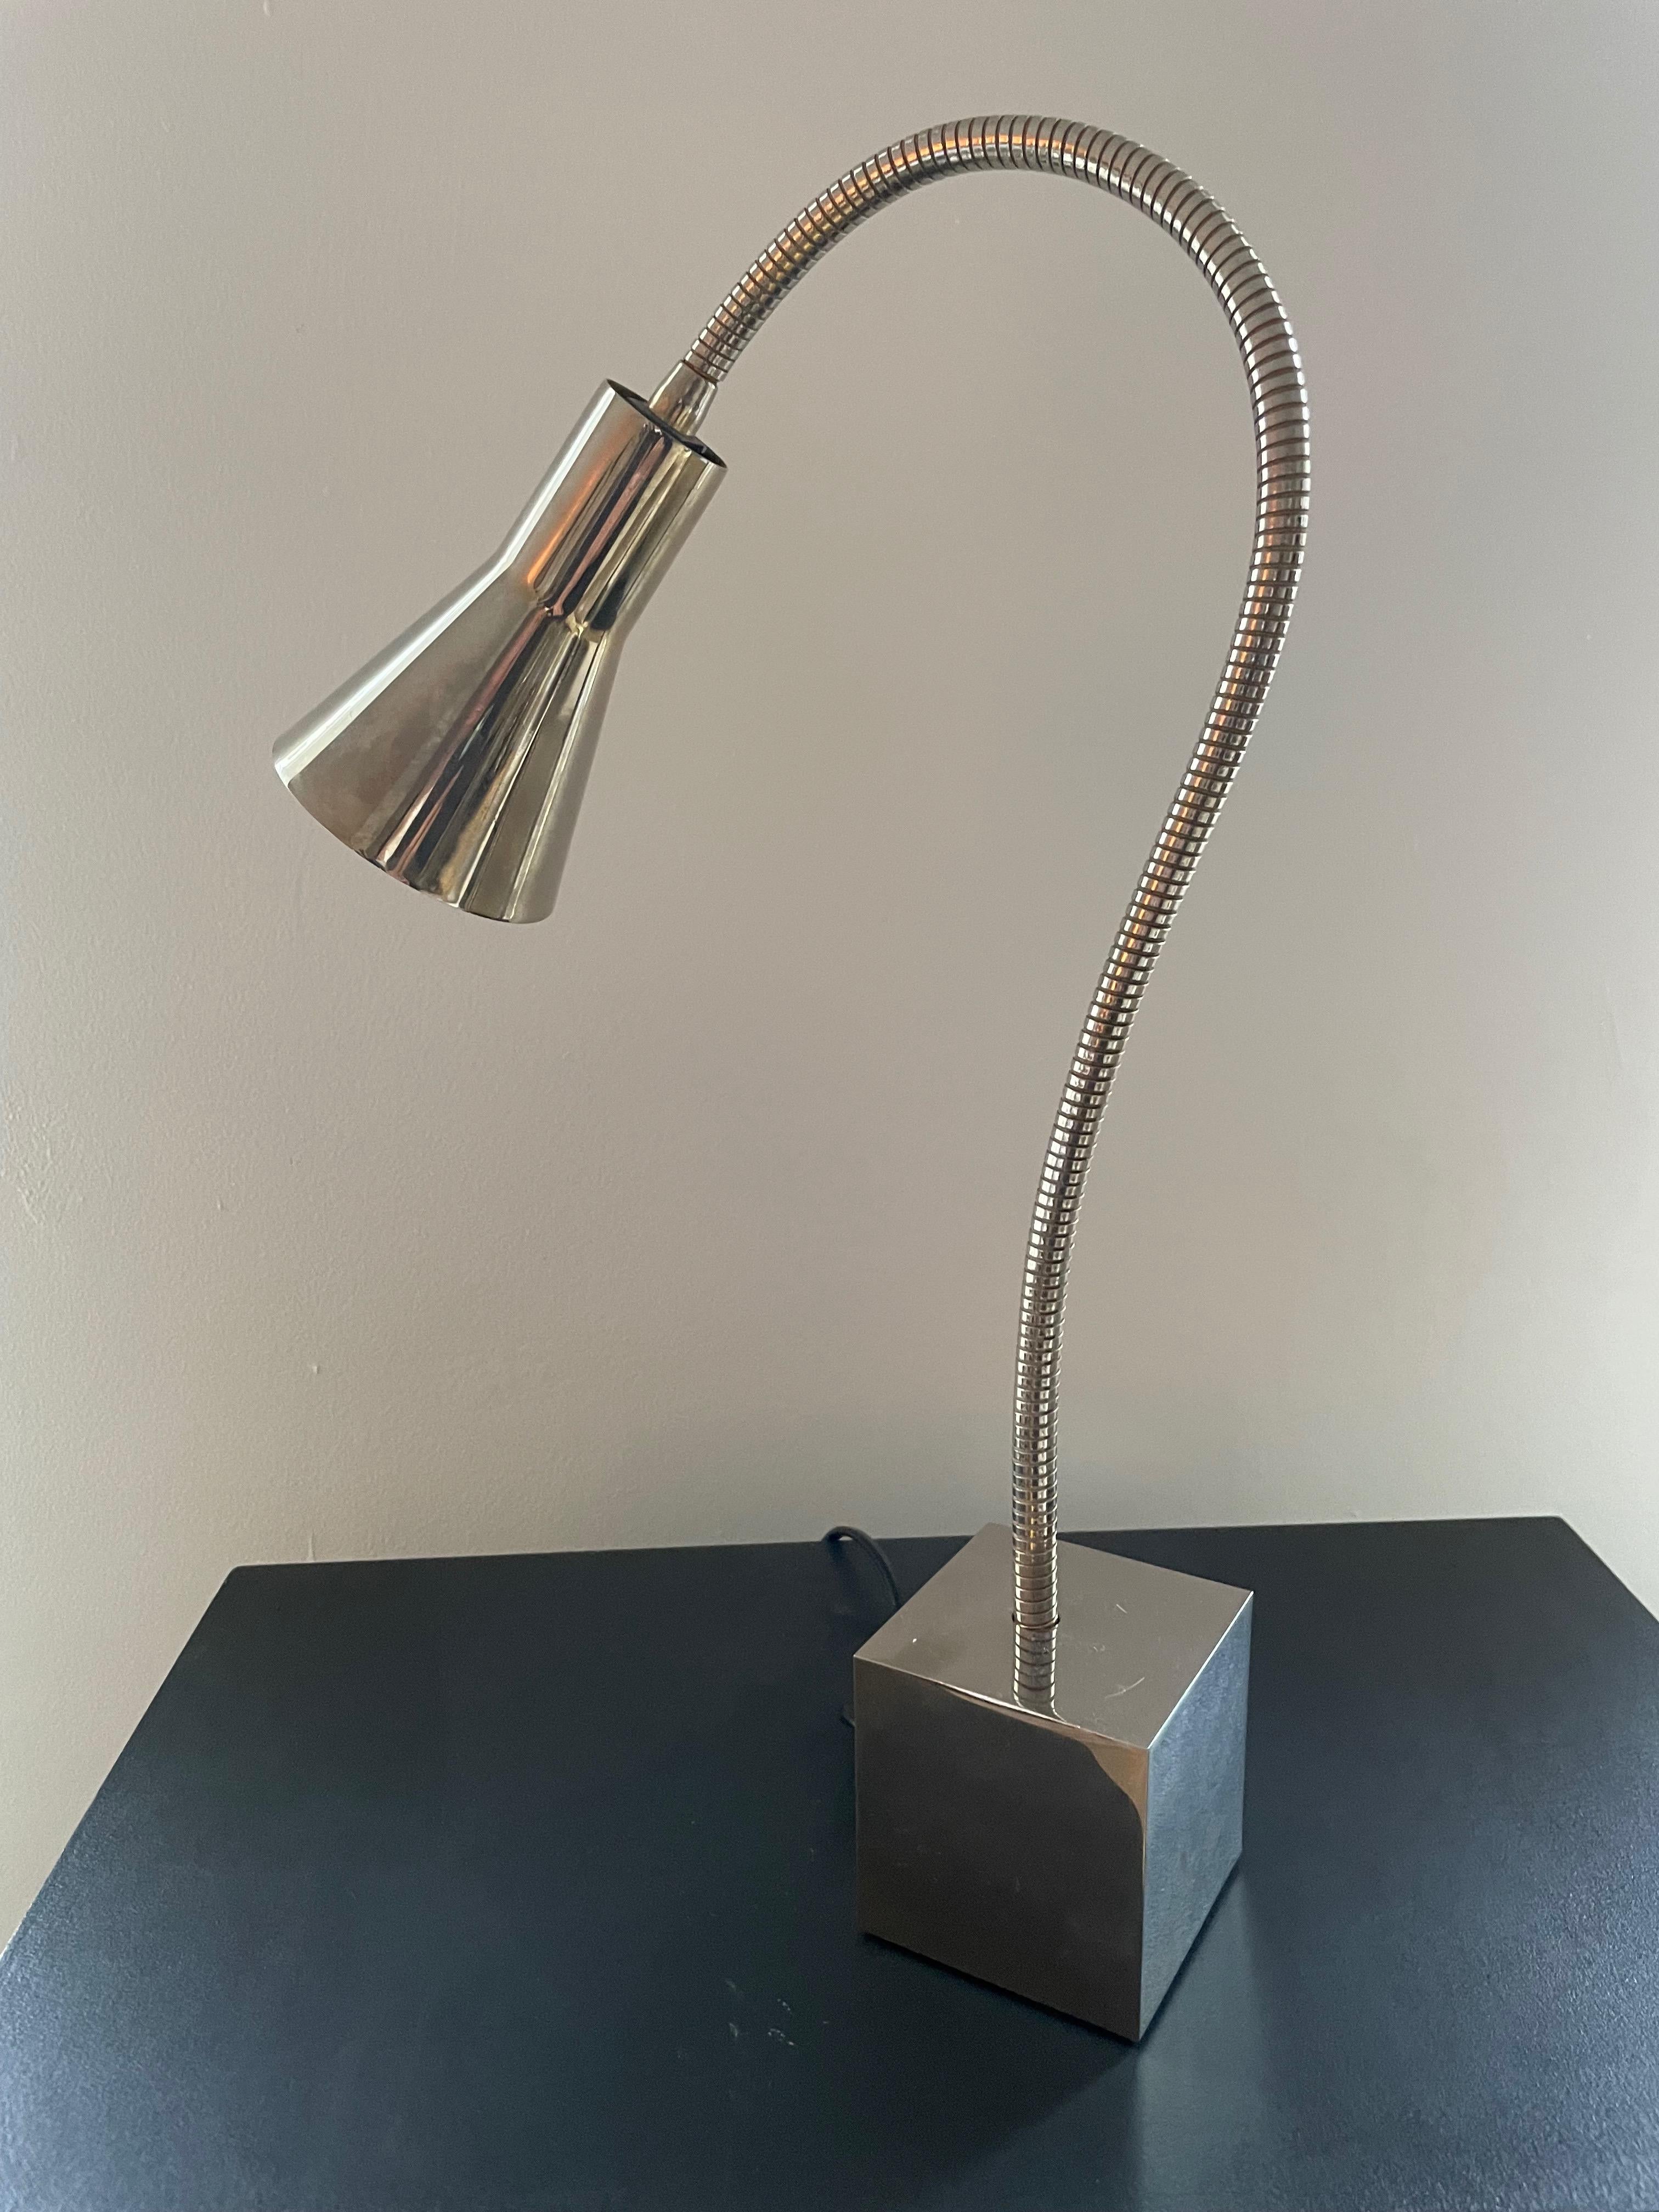 Mid-Century Modern Polish Steel Table Lamp With Flexible Reflector by Michel Boyer, France 1968. For Sale